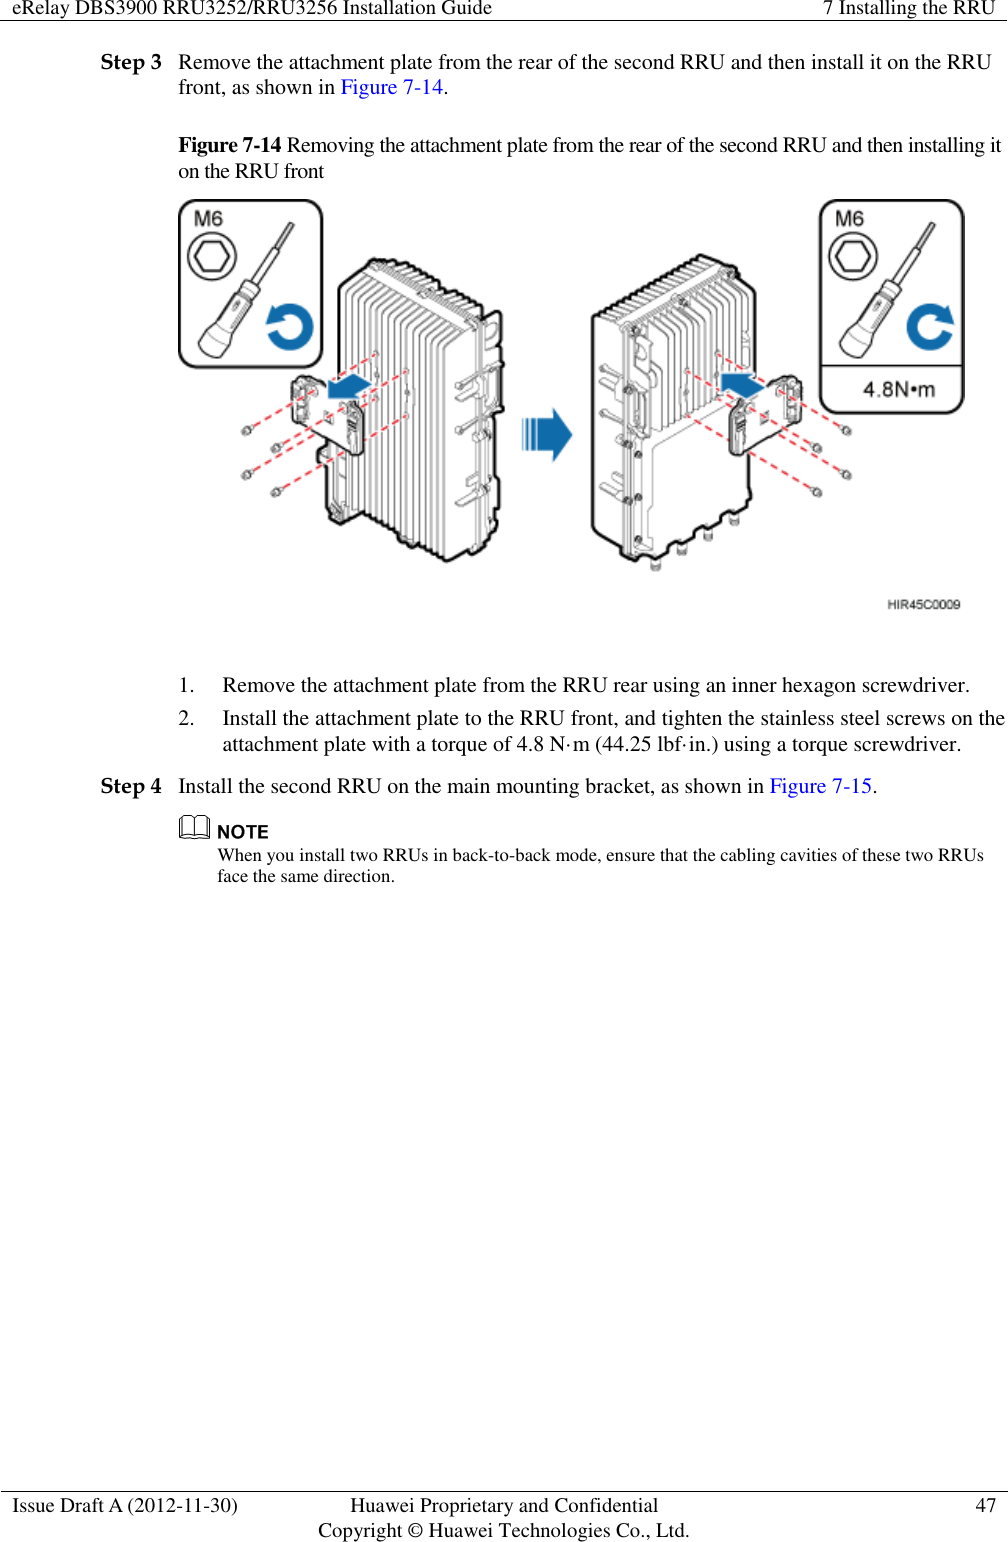 eRelay DBS3900 RRU3252/RRU3256 Installation Guide 7 Installing the RRU  Issue Draft A (2012-11-30) Huawei Proprietary and Confidential                                     Copyright © Huawei Technologies Co., Ltd. 47  Step 3 Remove the attachment plate from the rear of the second RRU and then install it on the RRU front, as shown in Figure 7-14.   Figure 7-14 Removing the attachment plate from the rear of the second RRU and then installing it on the RRU front   1. Remove the attachment plate from the RRU rear using an inner hexagon screwdriver. 2. Install the attachment plate to the RRU front, and tighten the stainless steel screws on the attachment plate with a torque of 4.8 N·m (44.25 lbf·in.) using a torque screwdriver.   Step 4 Install the second RRU on the main mounting bracket, as shown in Figure 7-15.  When you install two RRUs in back-to-back mode, ensure that the cabling cavities of these two RRUs face the same direction.   